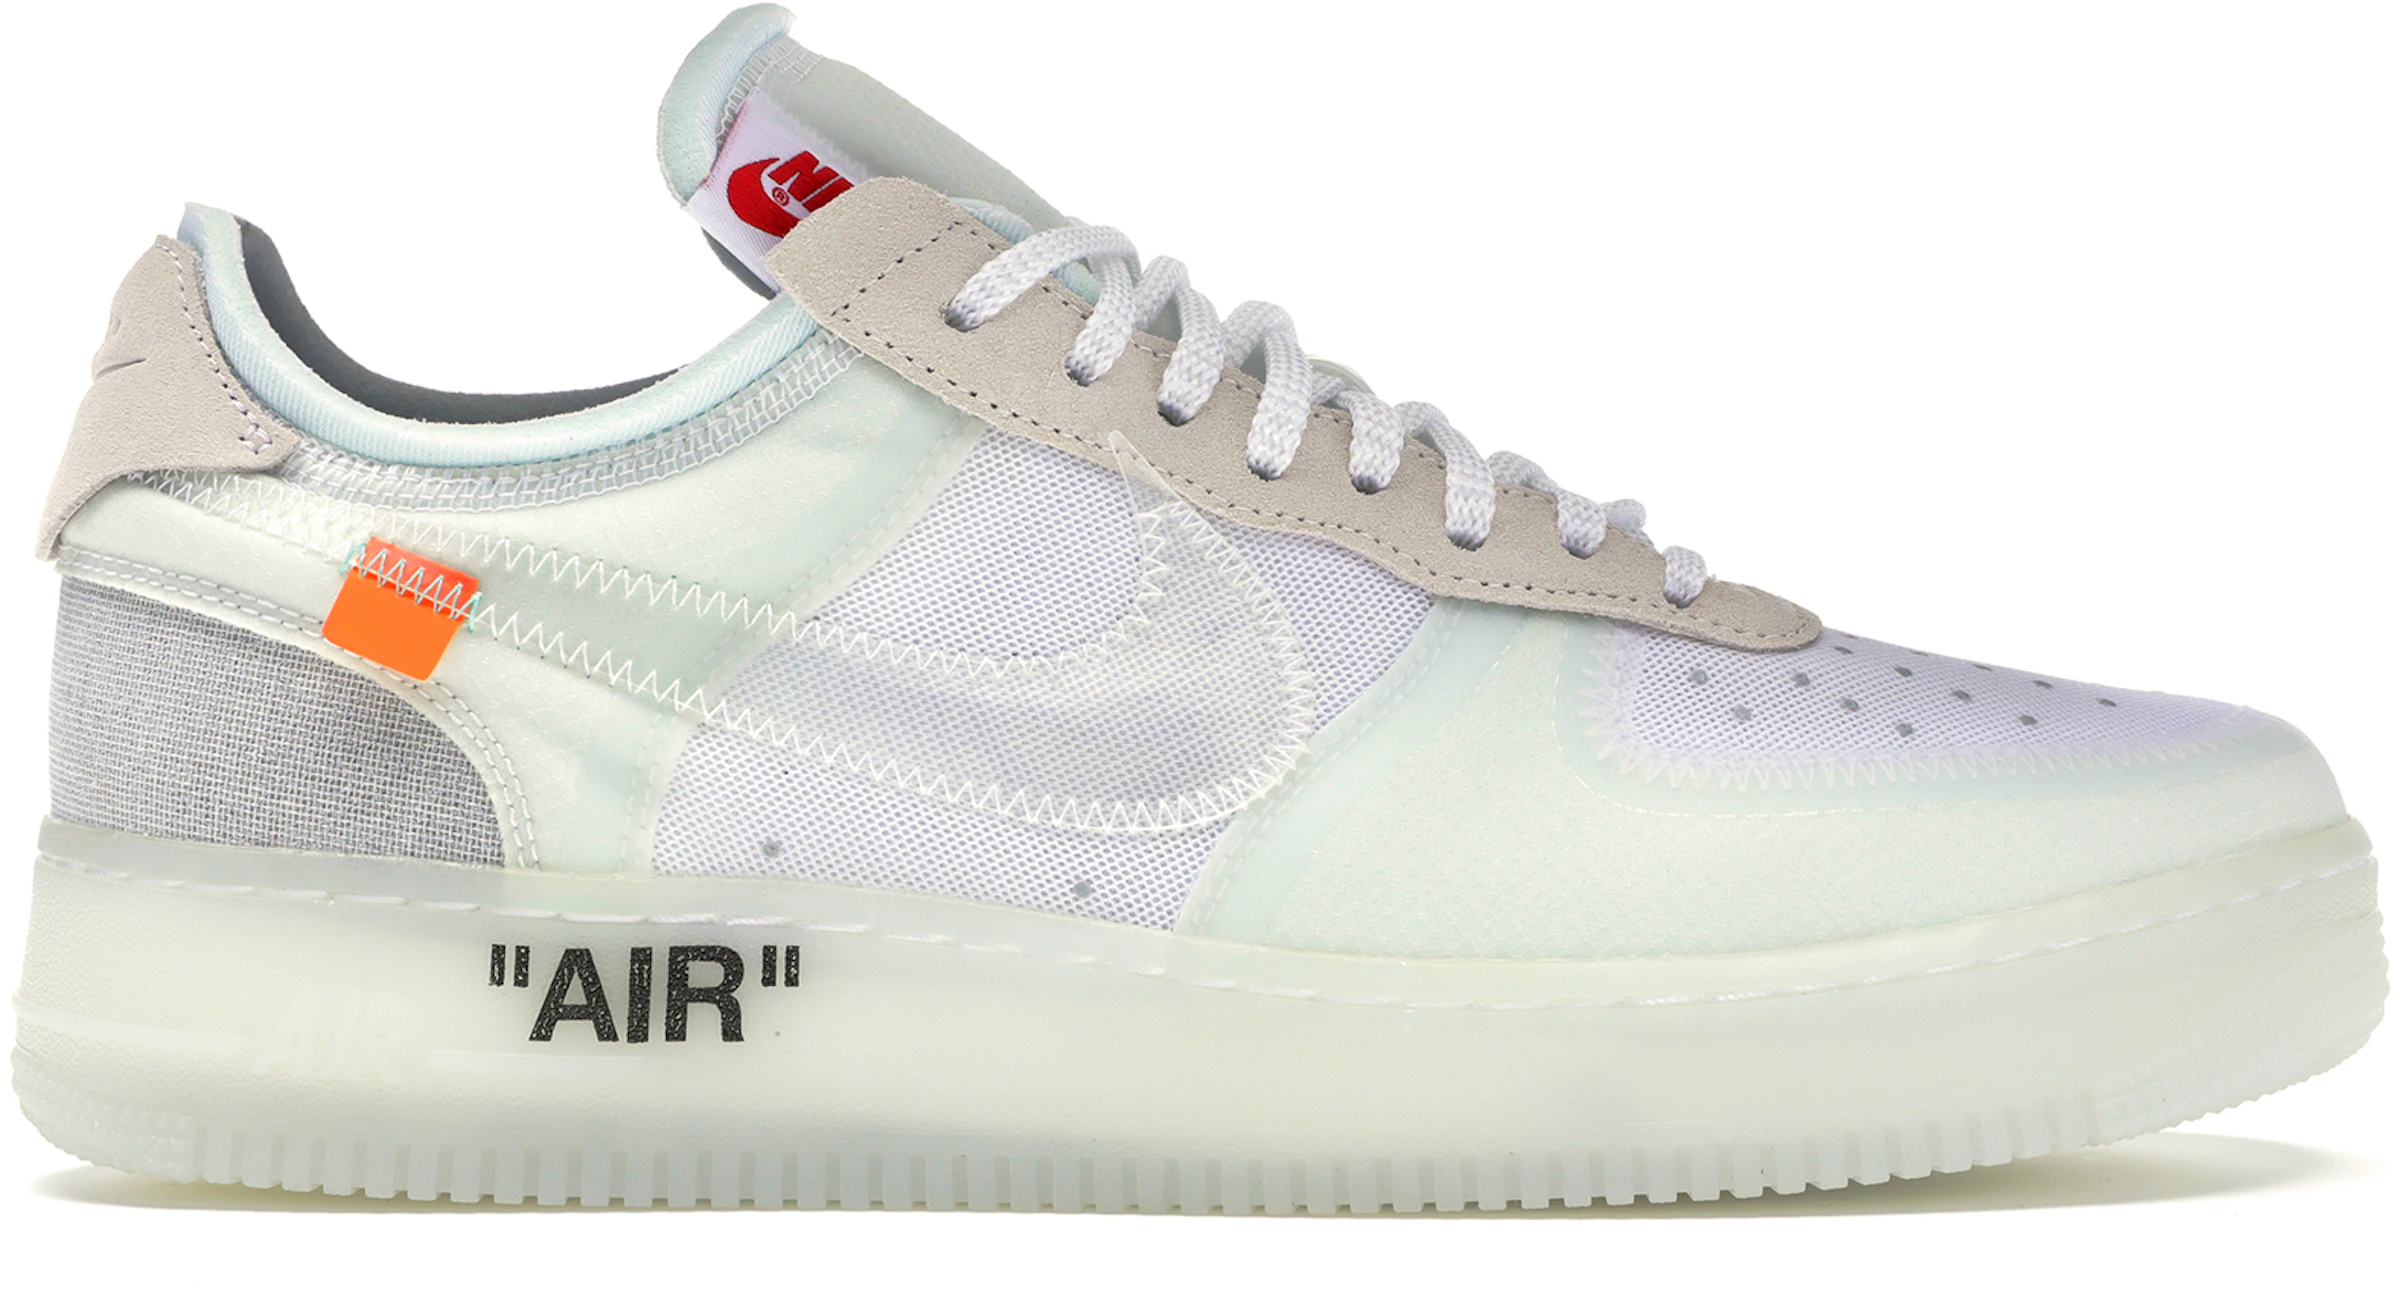 Buy Nike Air Force OFF-WHITE Shoes New Sneakers StockX | lupon.gov.ph